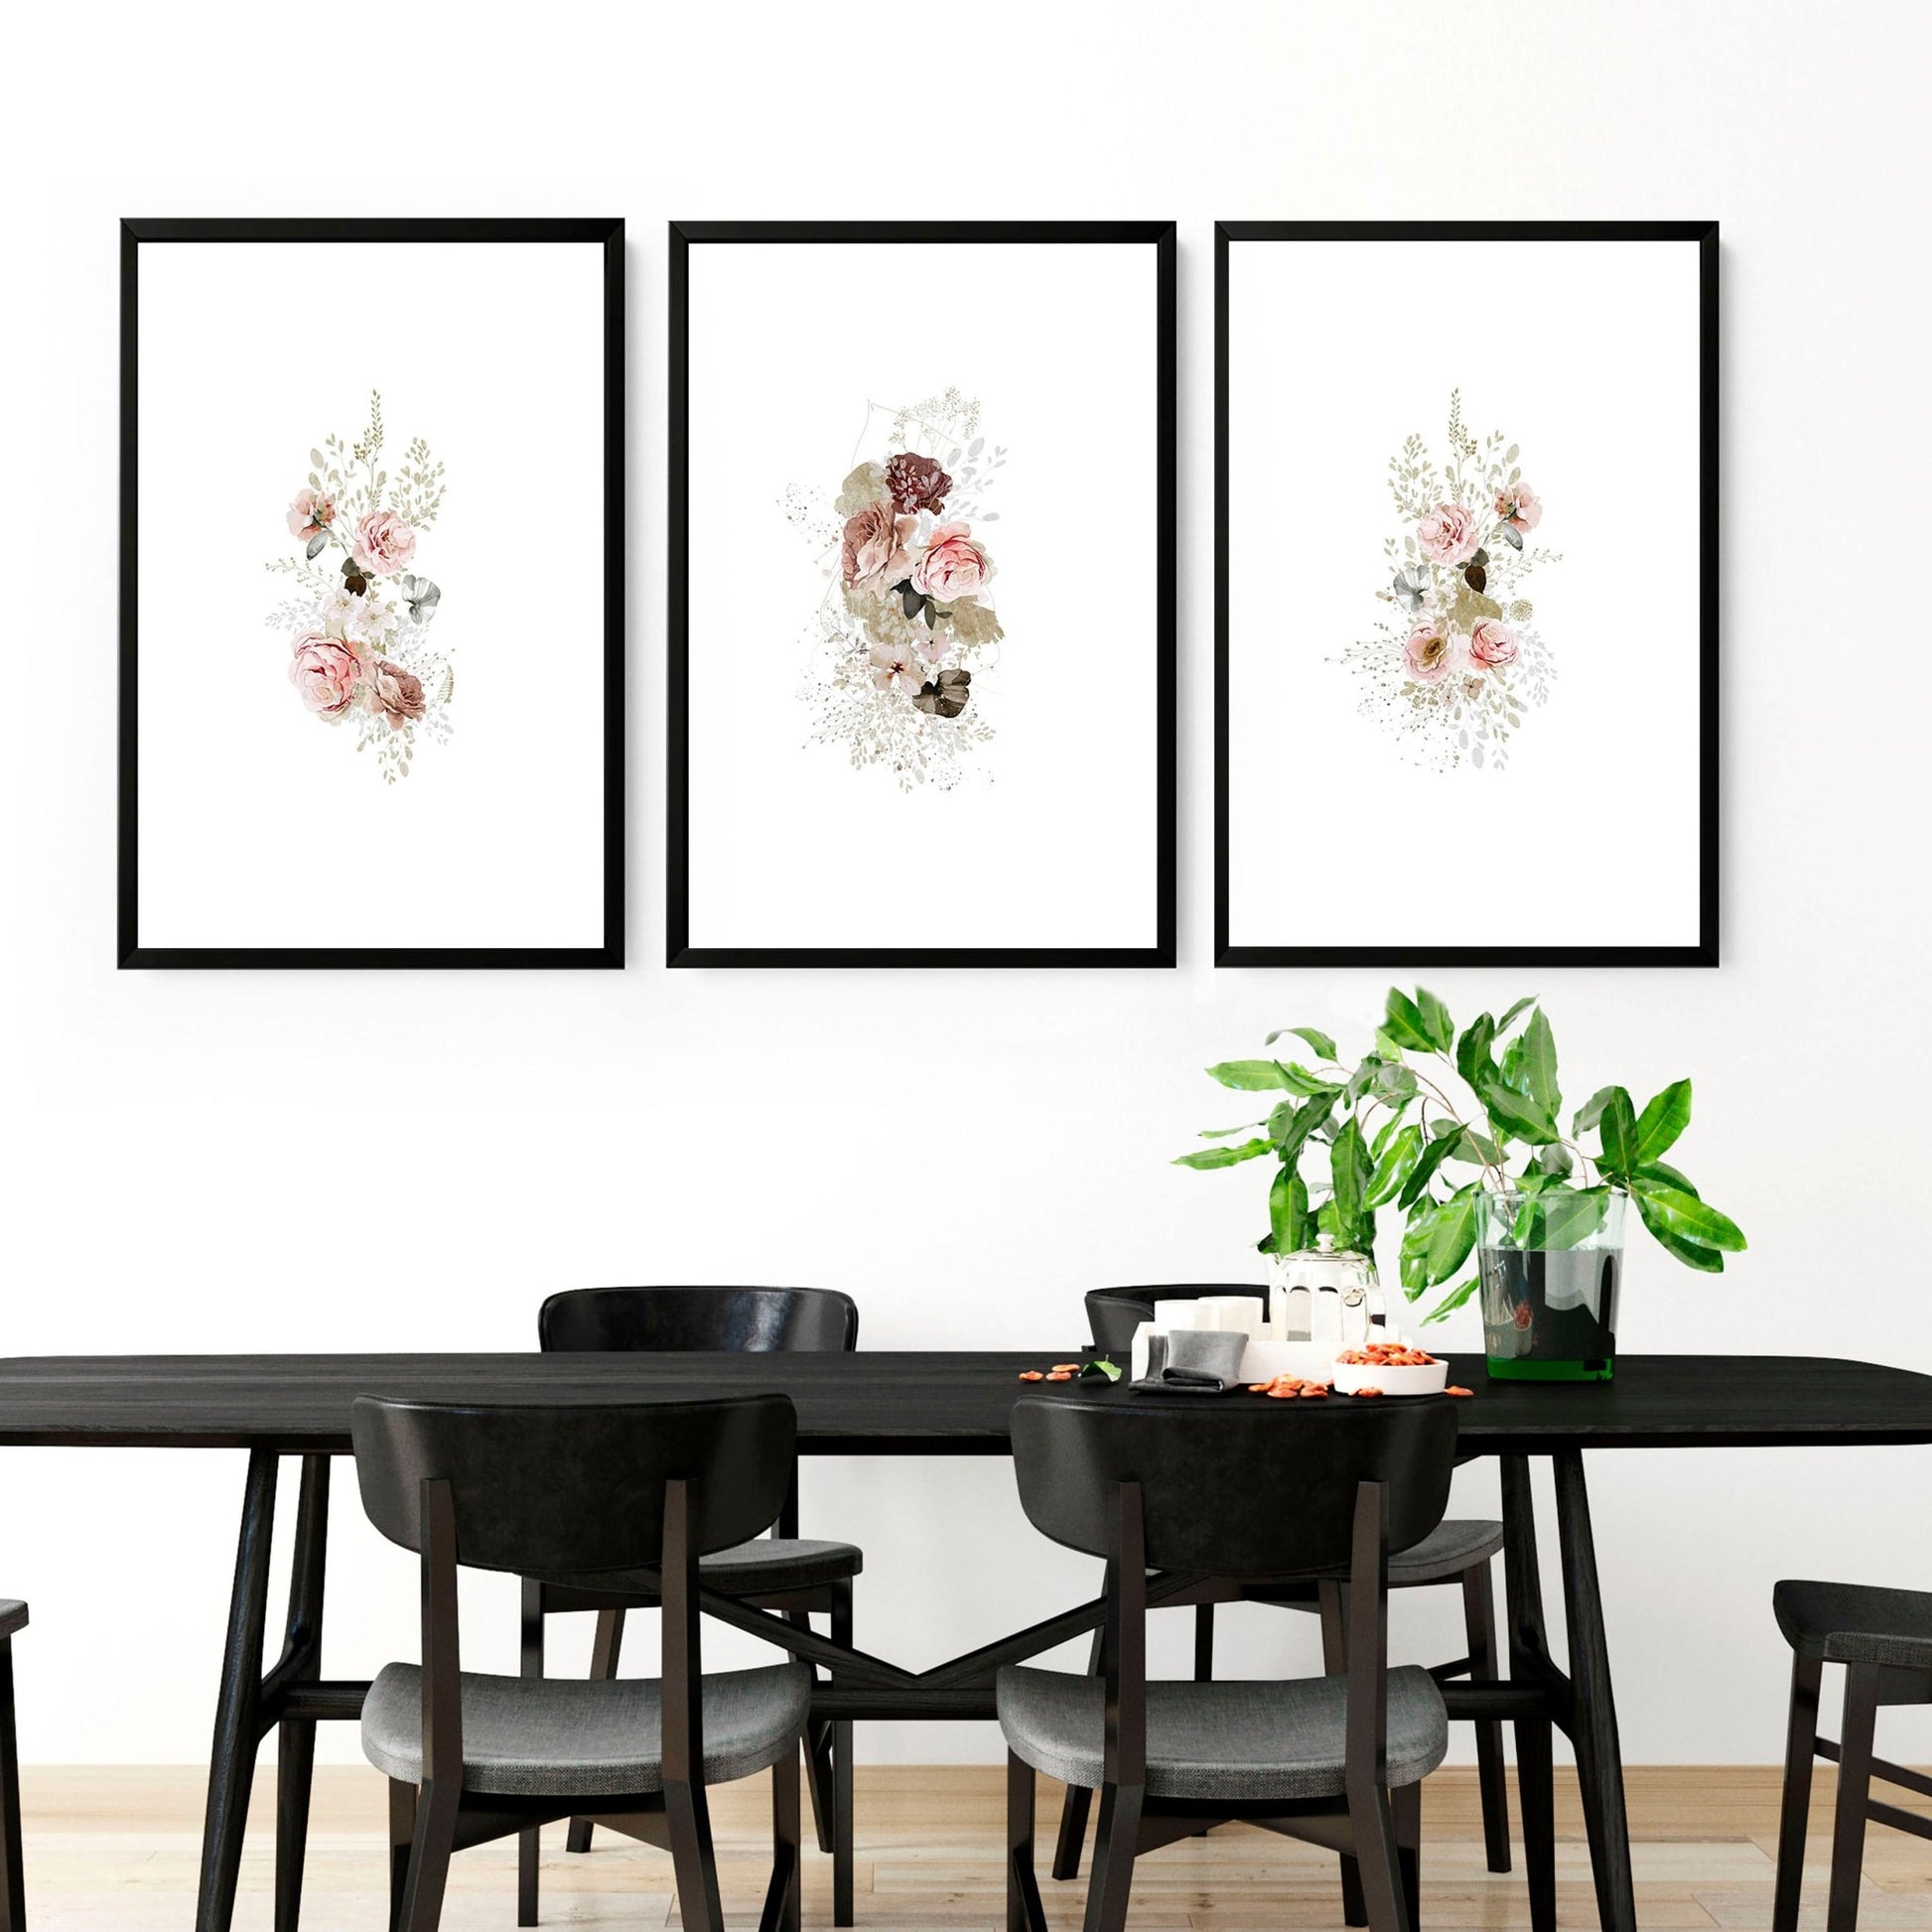 Art for the kitchen | set of 3 Shabby Chic wall art prints